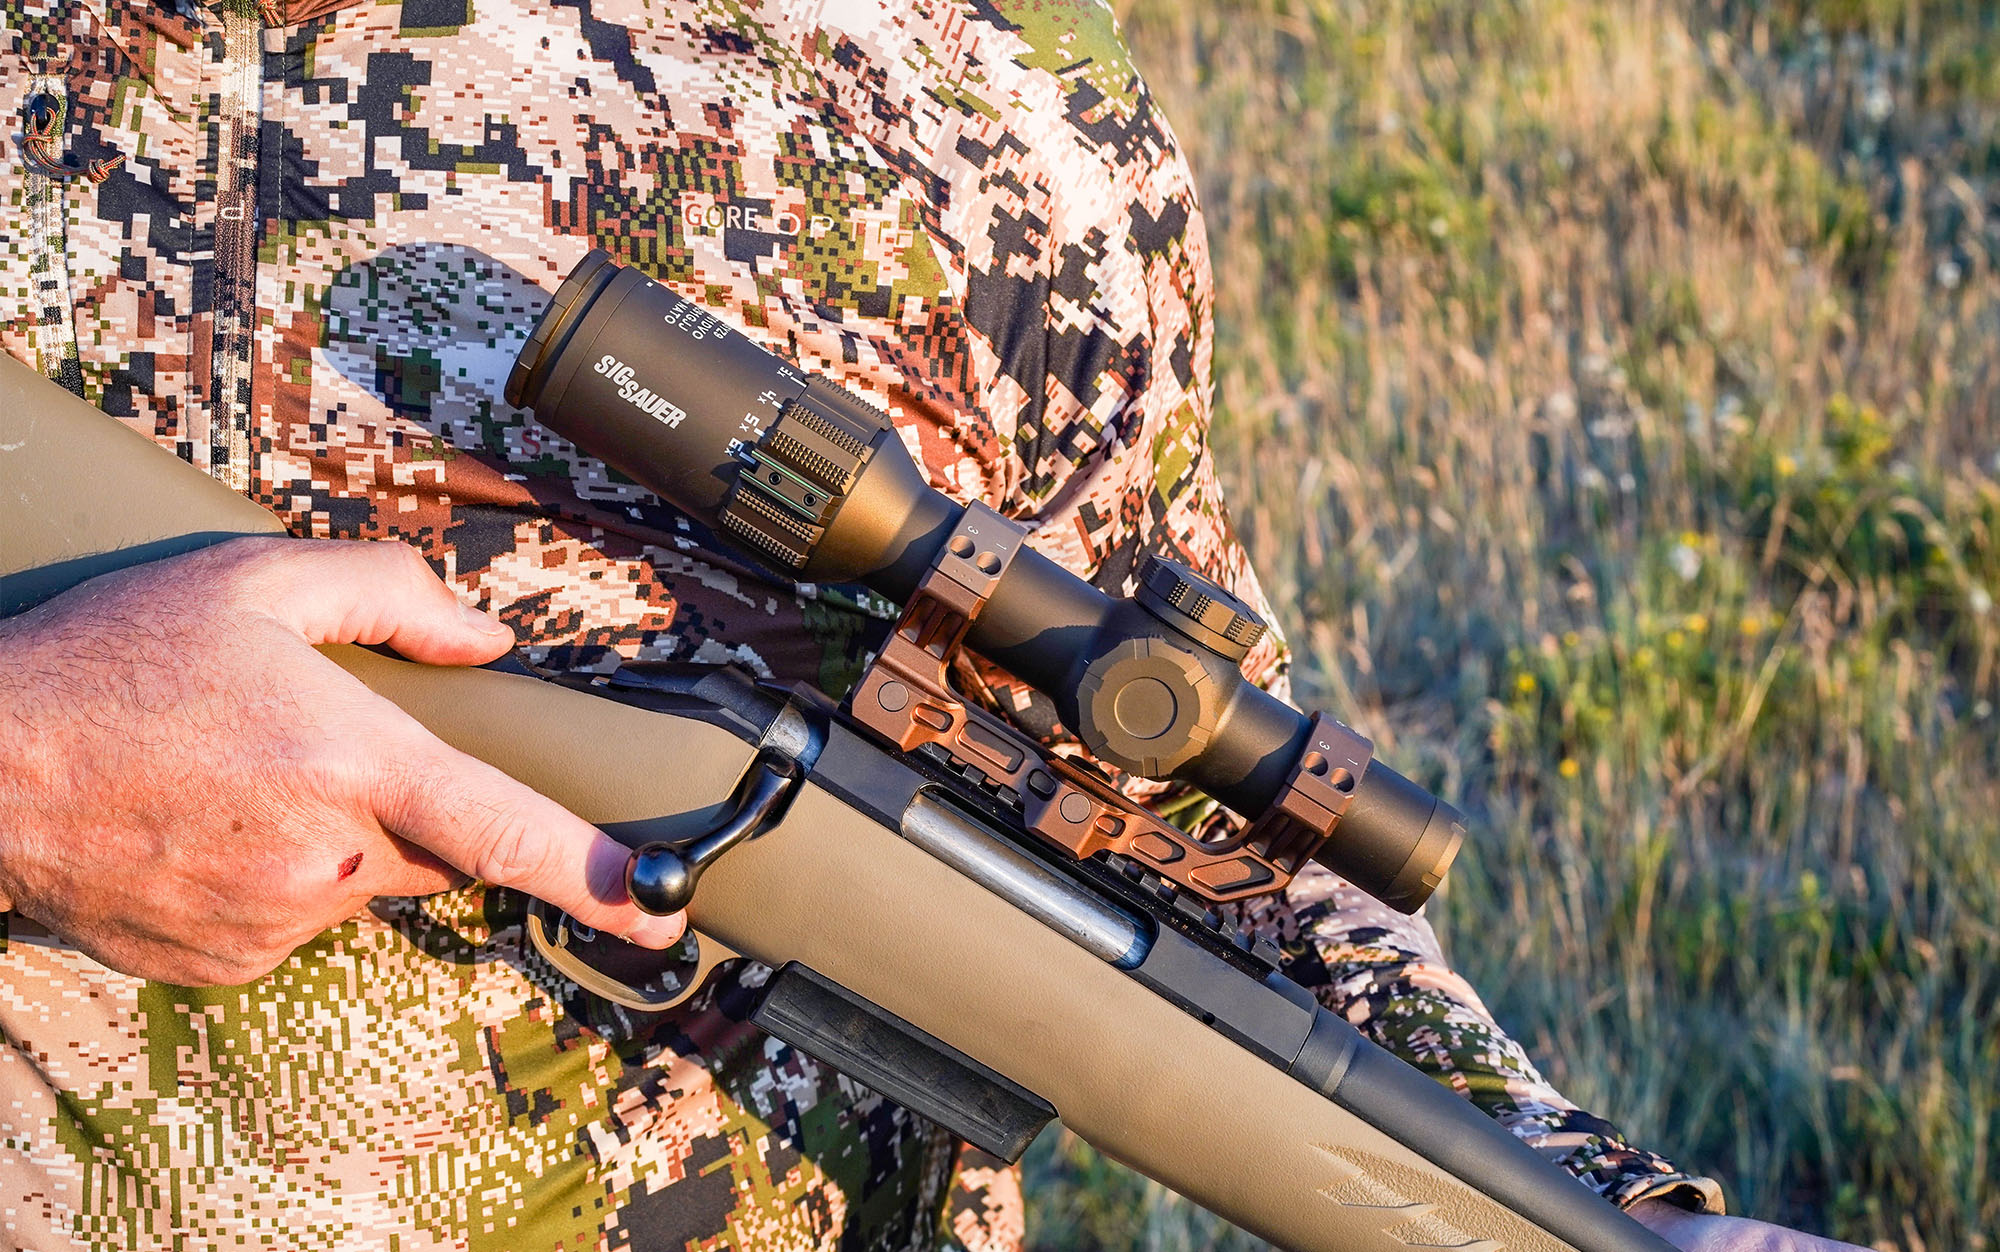 We tested the best LPVO riflescopes.